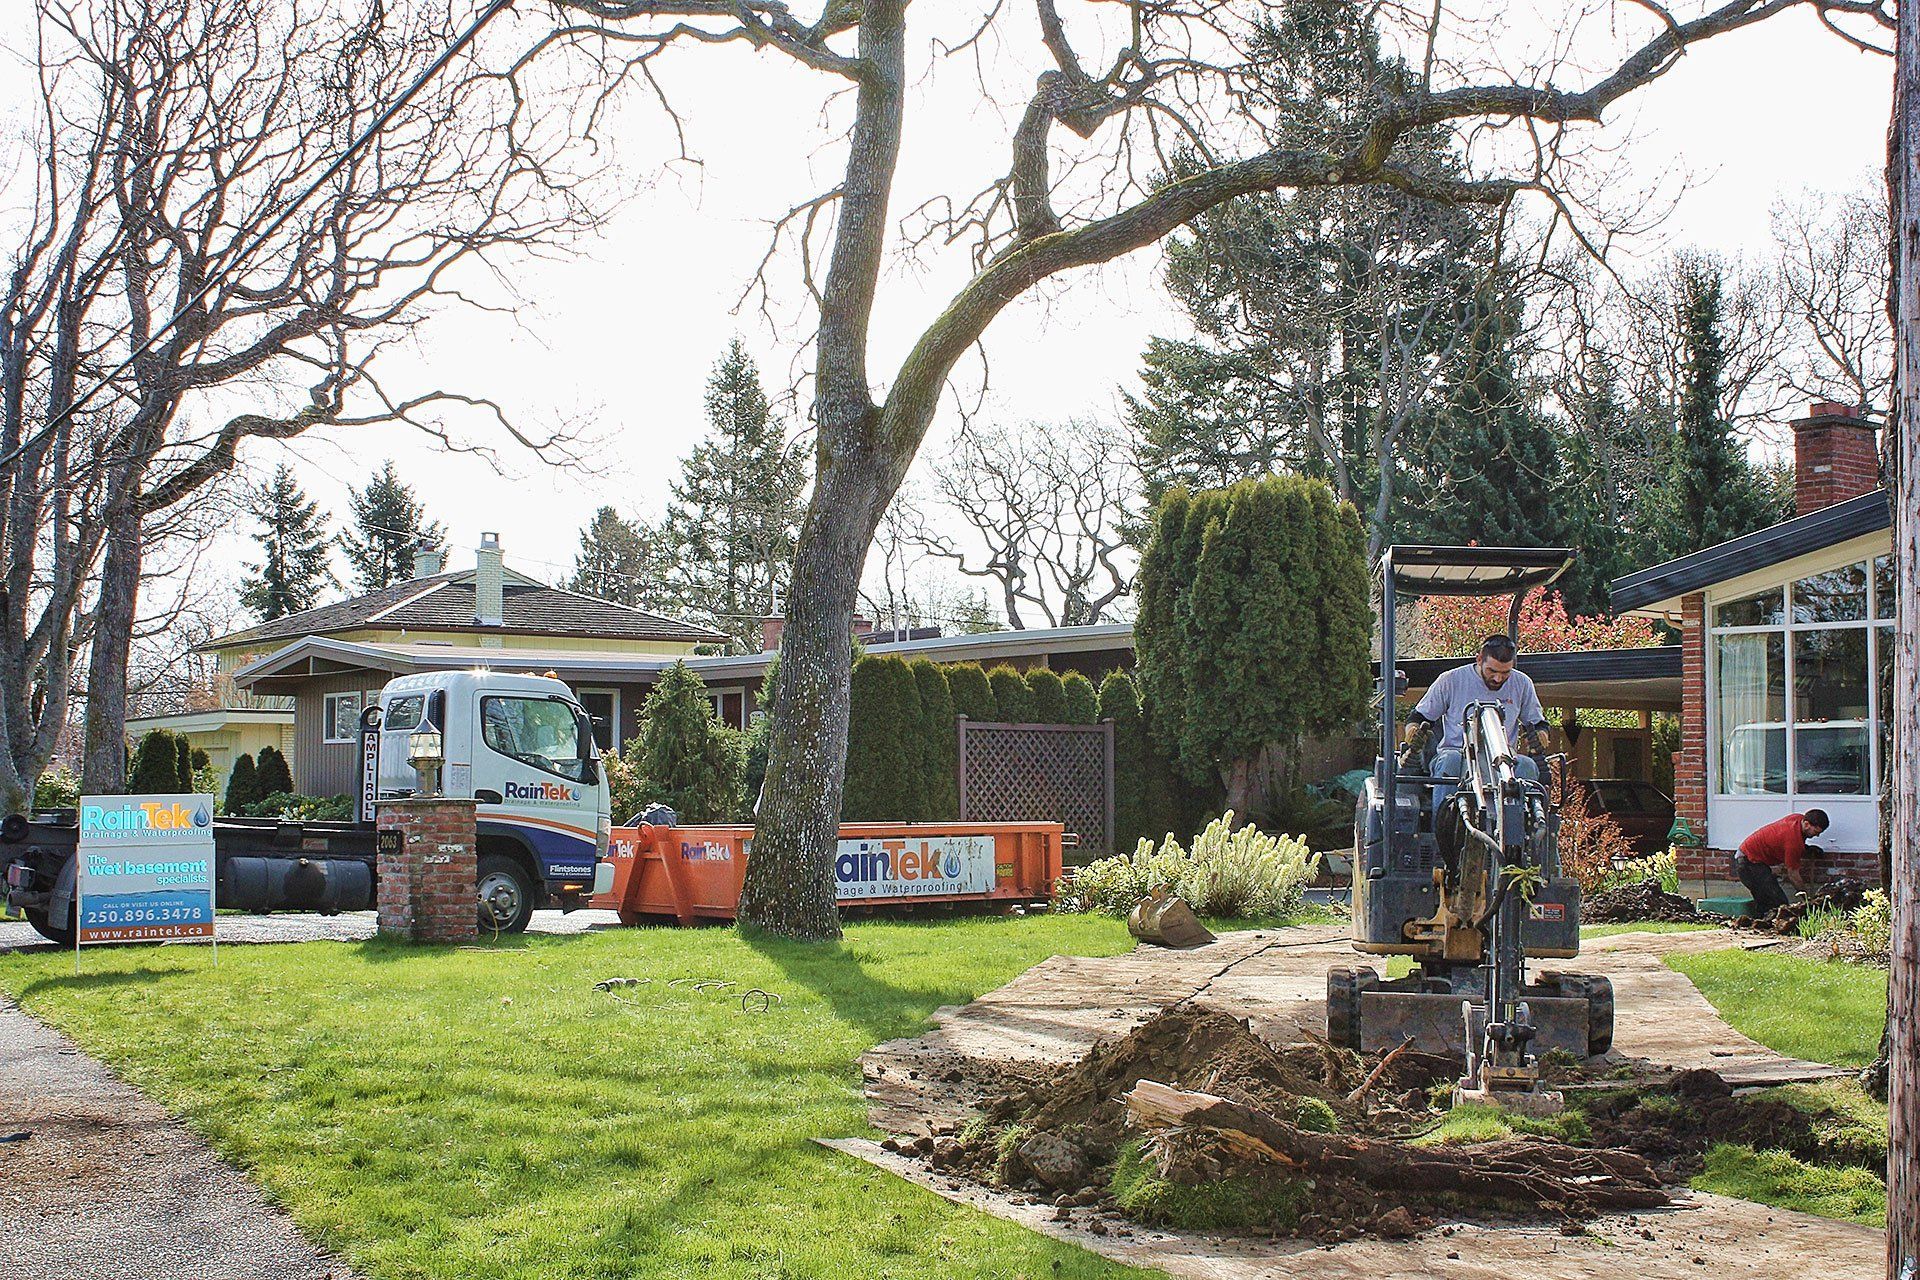 image showing RainTek workers installing anew drain system for a residential home in Victoria BC